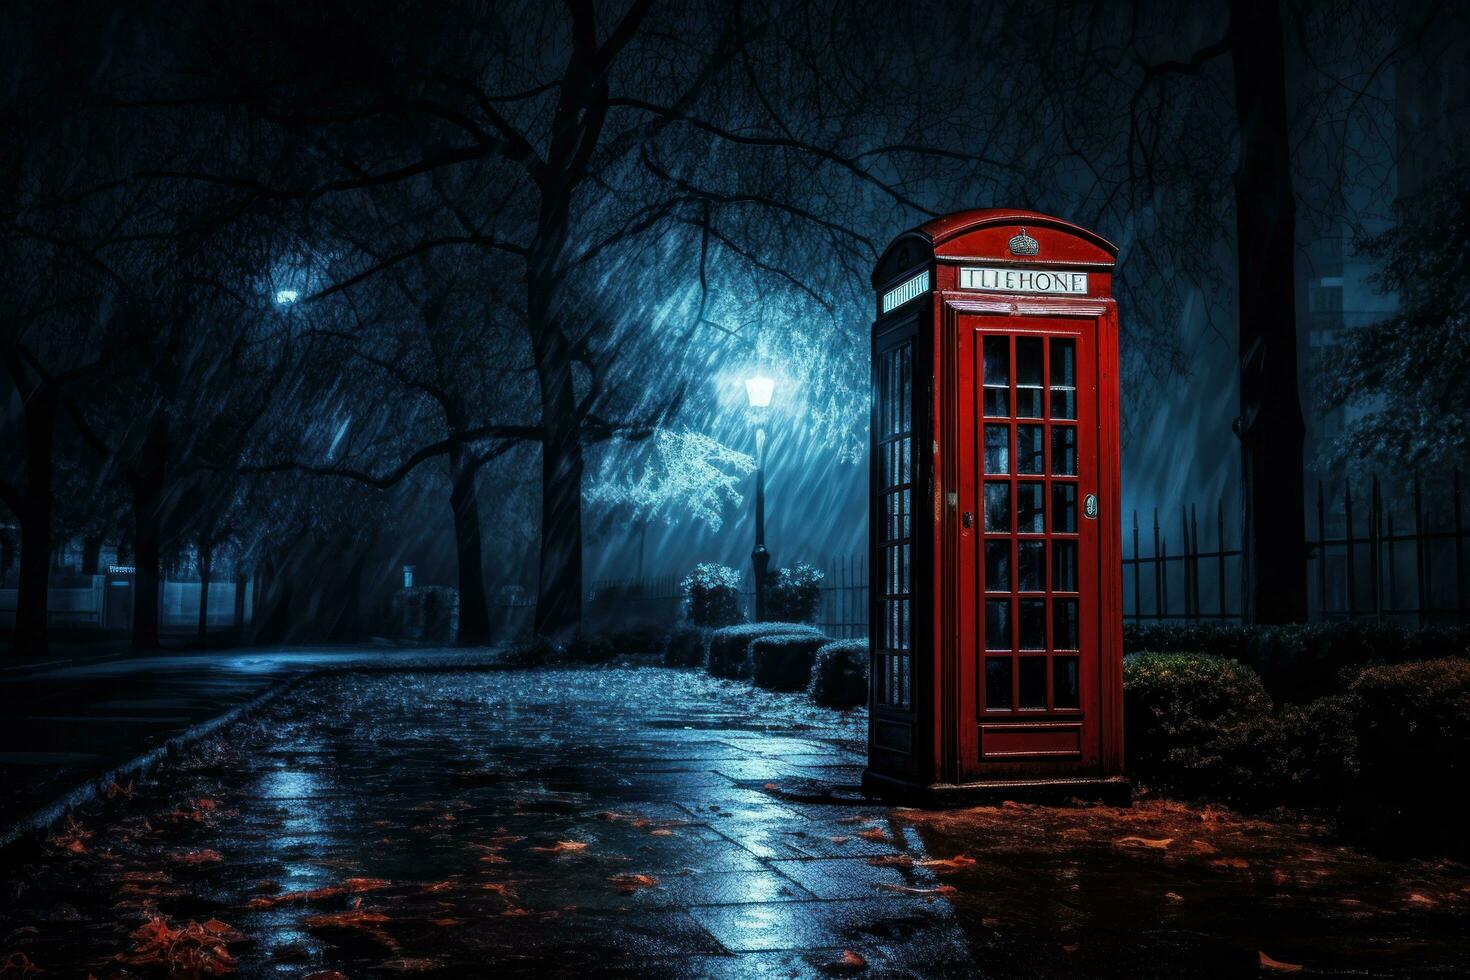 A  red telephone booth photo